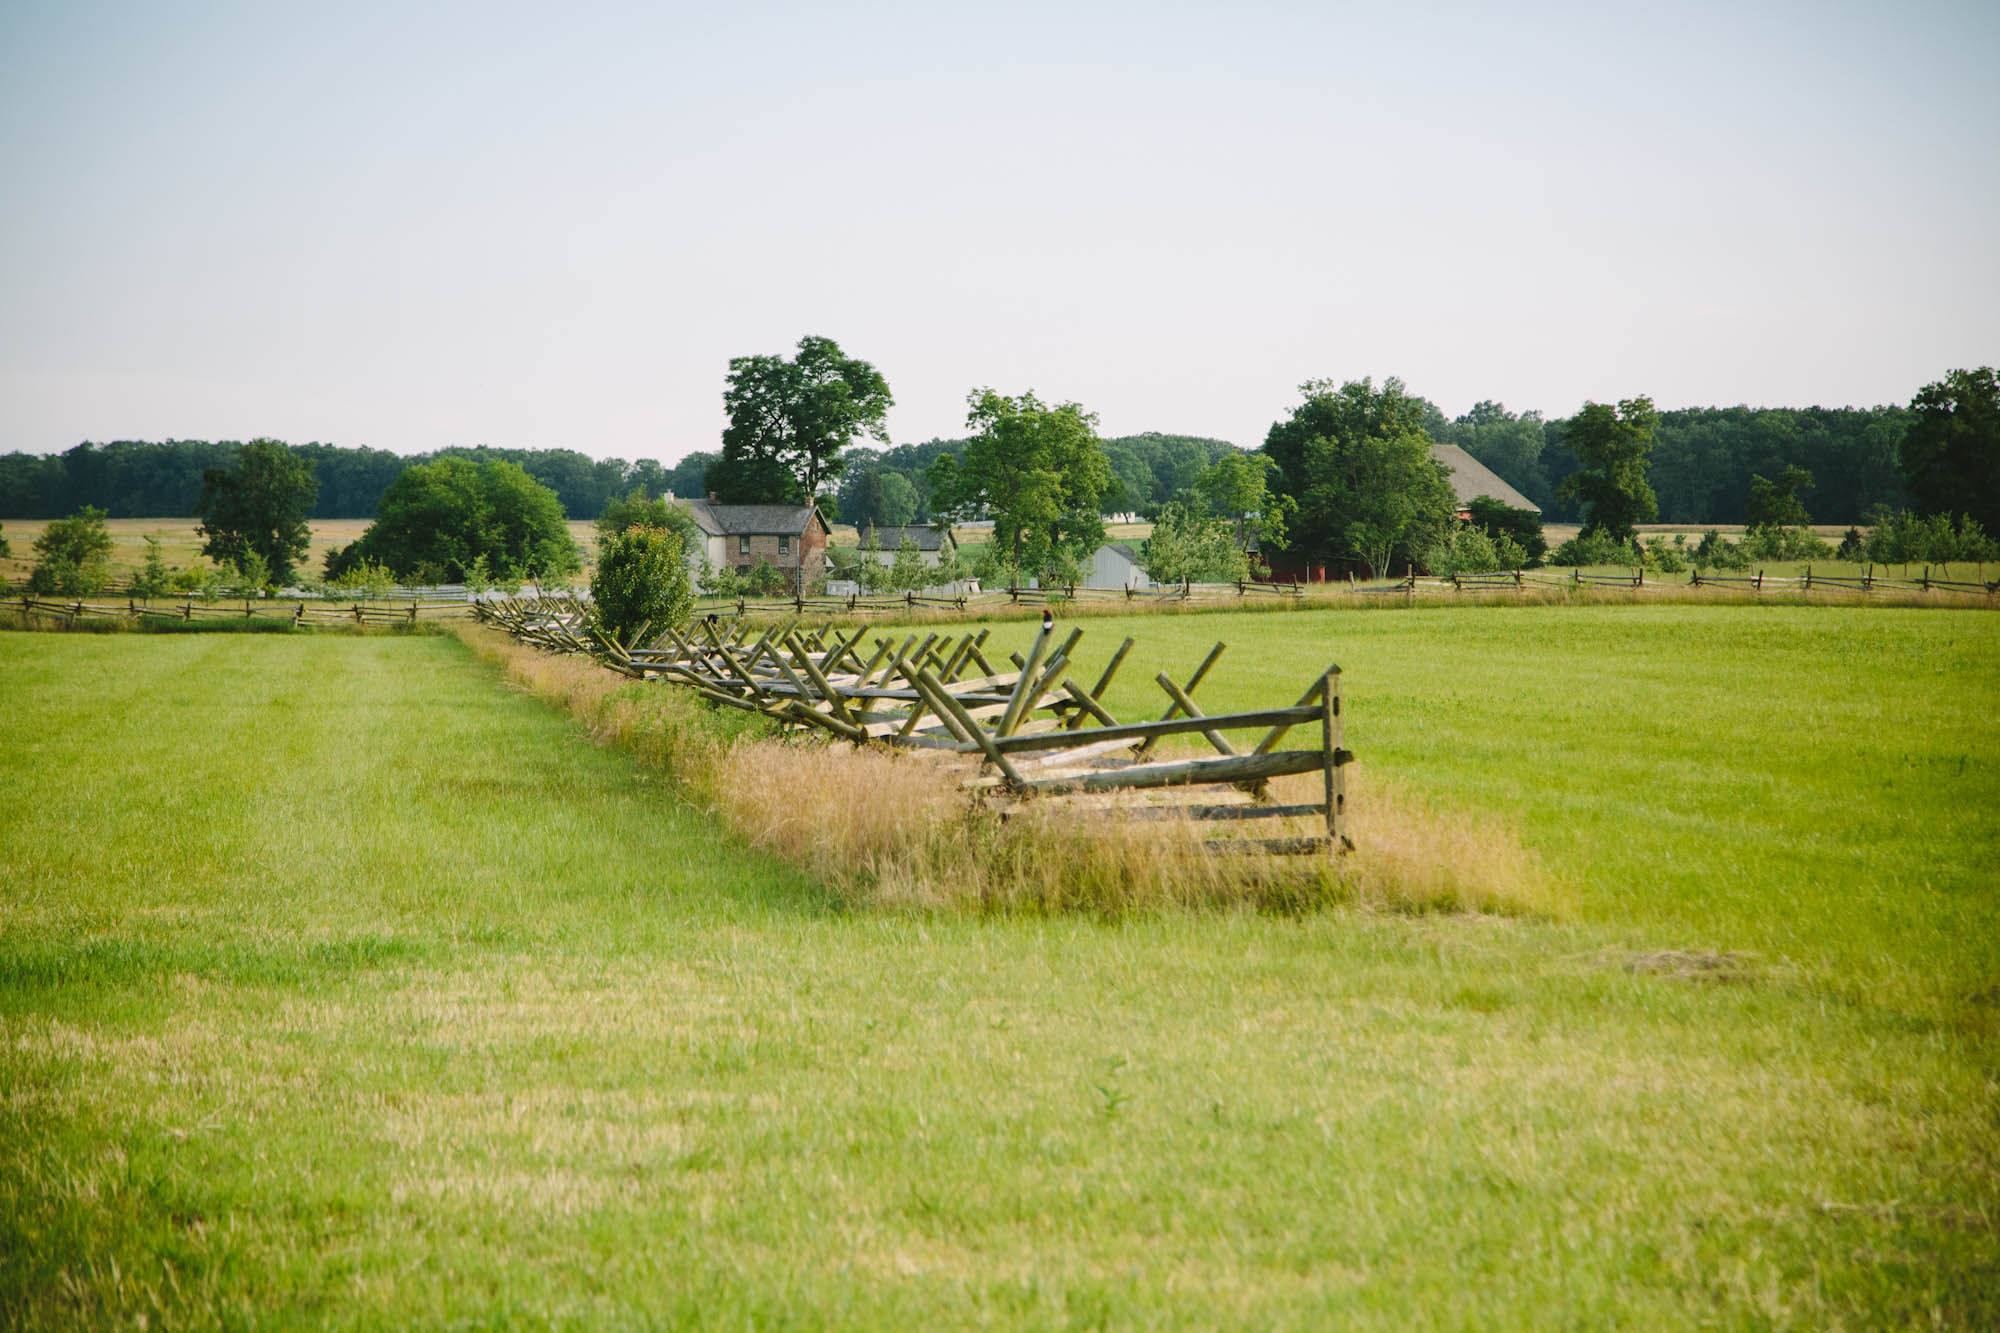 The historic Gettysburg Battlefield tour is part of the Teacher Symposium package.